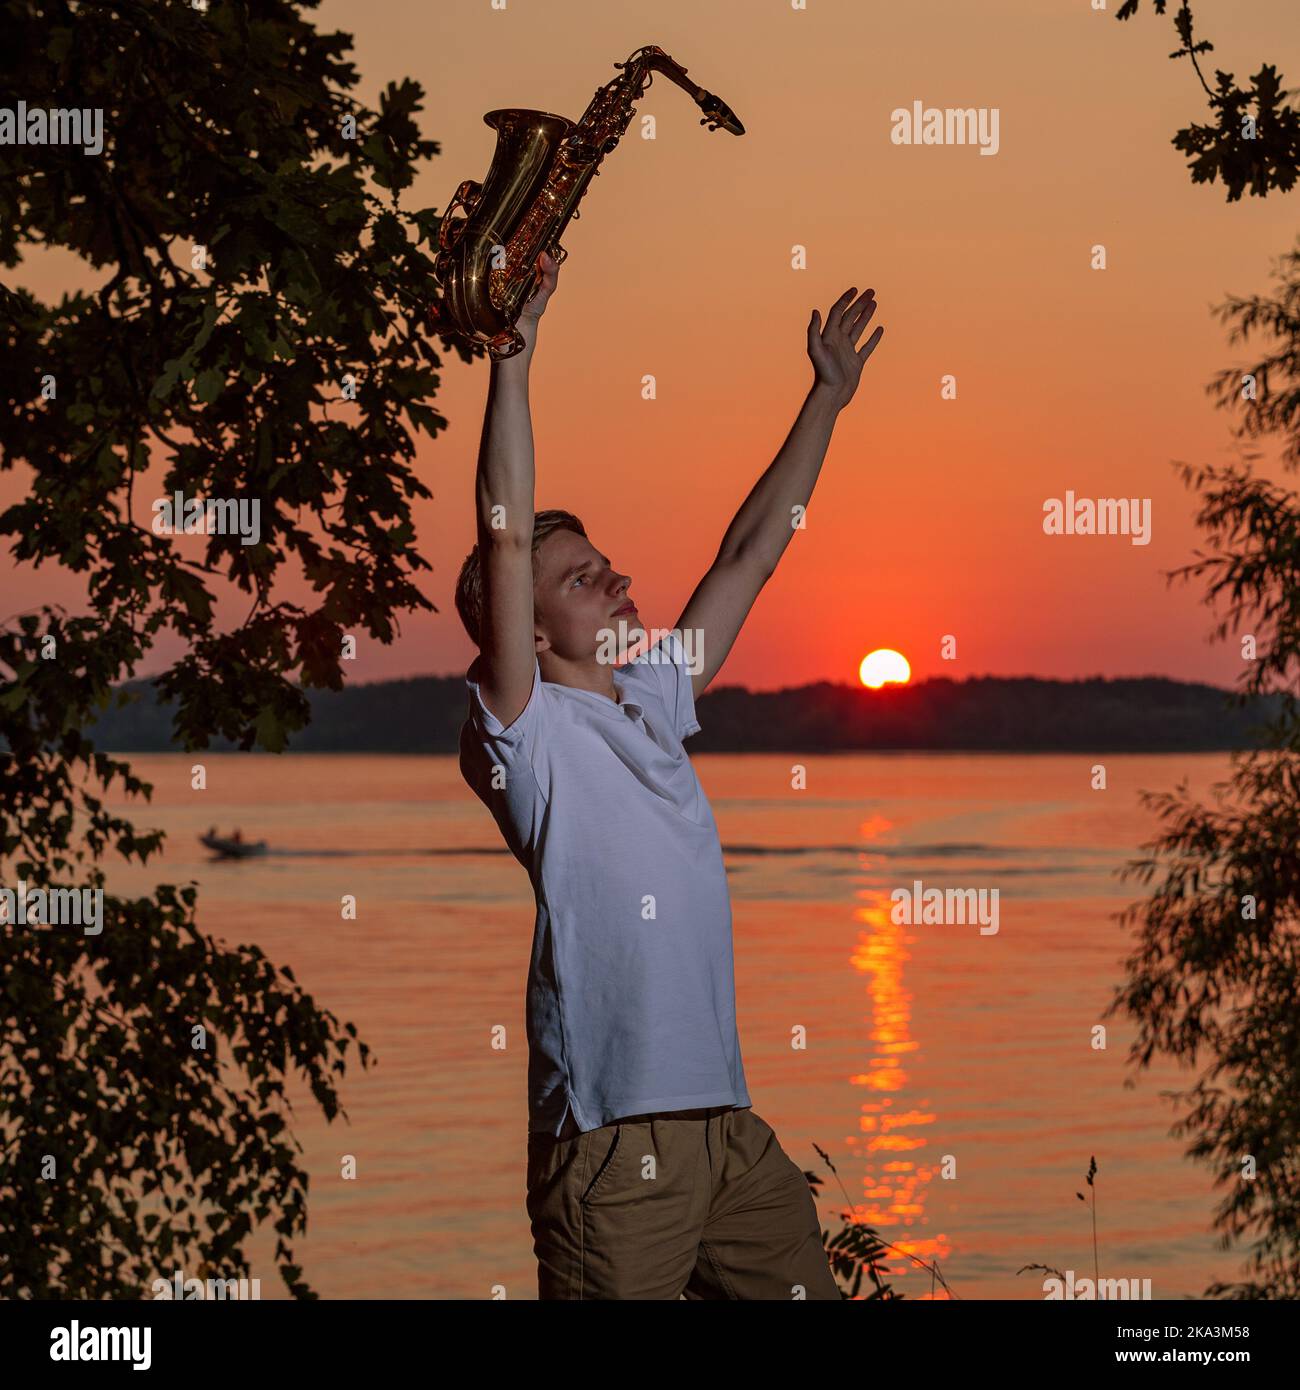 A young man with a saxophone raised his hands up, enjoying the sunset. Stock Photo